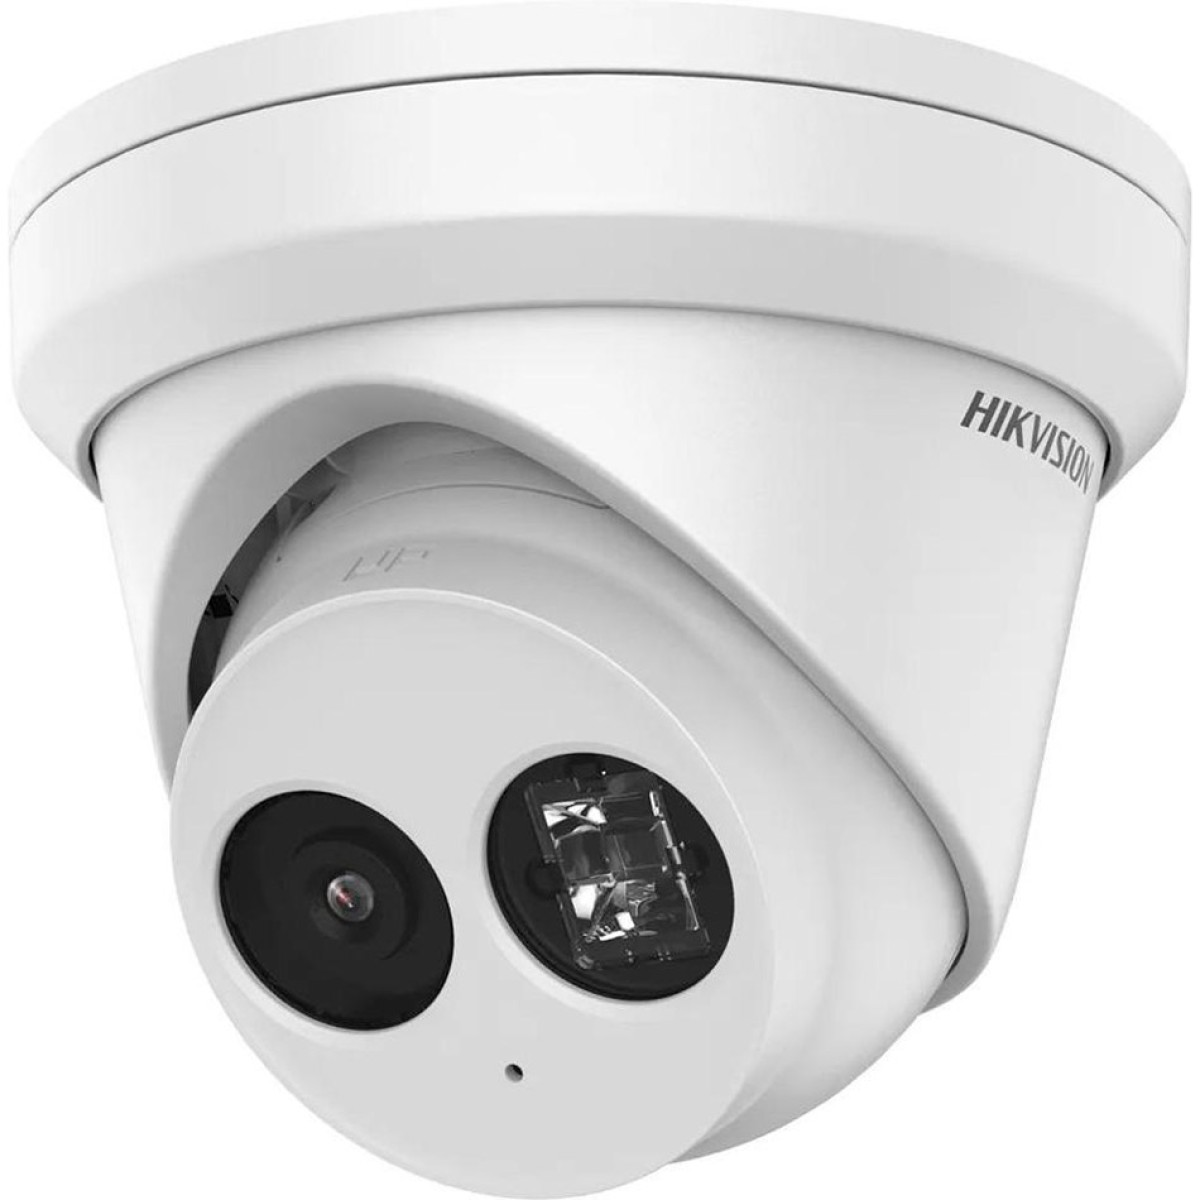 IP-камера Hikvision DS-2CD2345FWD-I (2.8) 98_98.jpg - фото 1